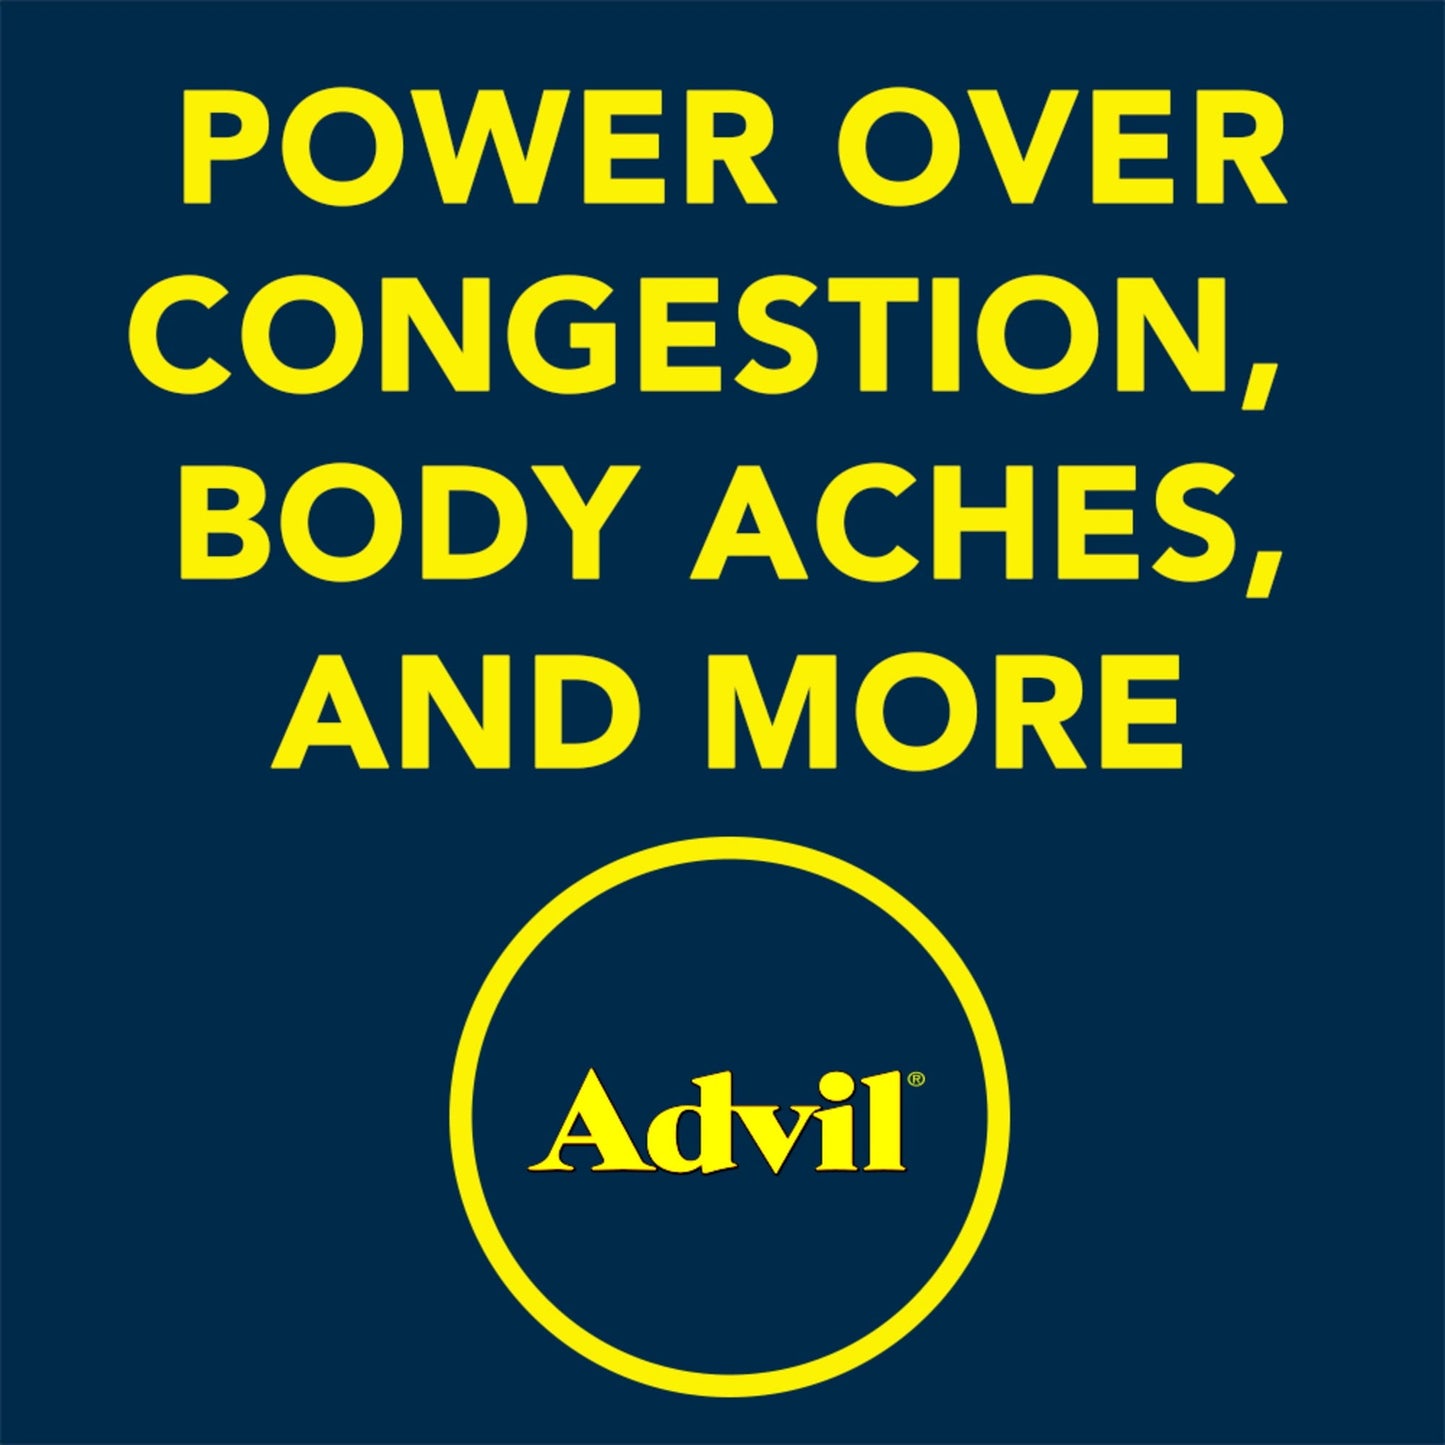 Advil Sinus Congestion and Pain, Sinus Medicine, Pain Reliever and Fever Reducer With Ibuprofen and Phenylephrine Hcl - 20 Coated Tablets